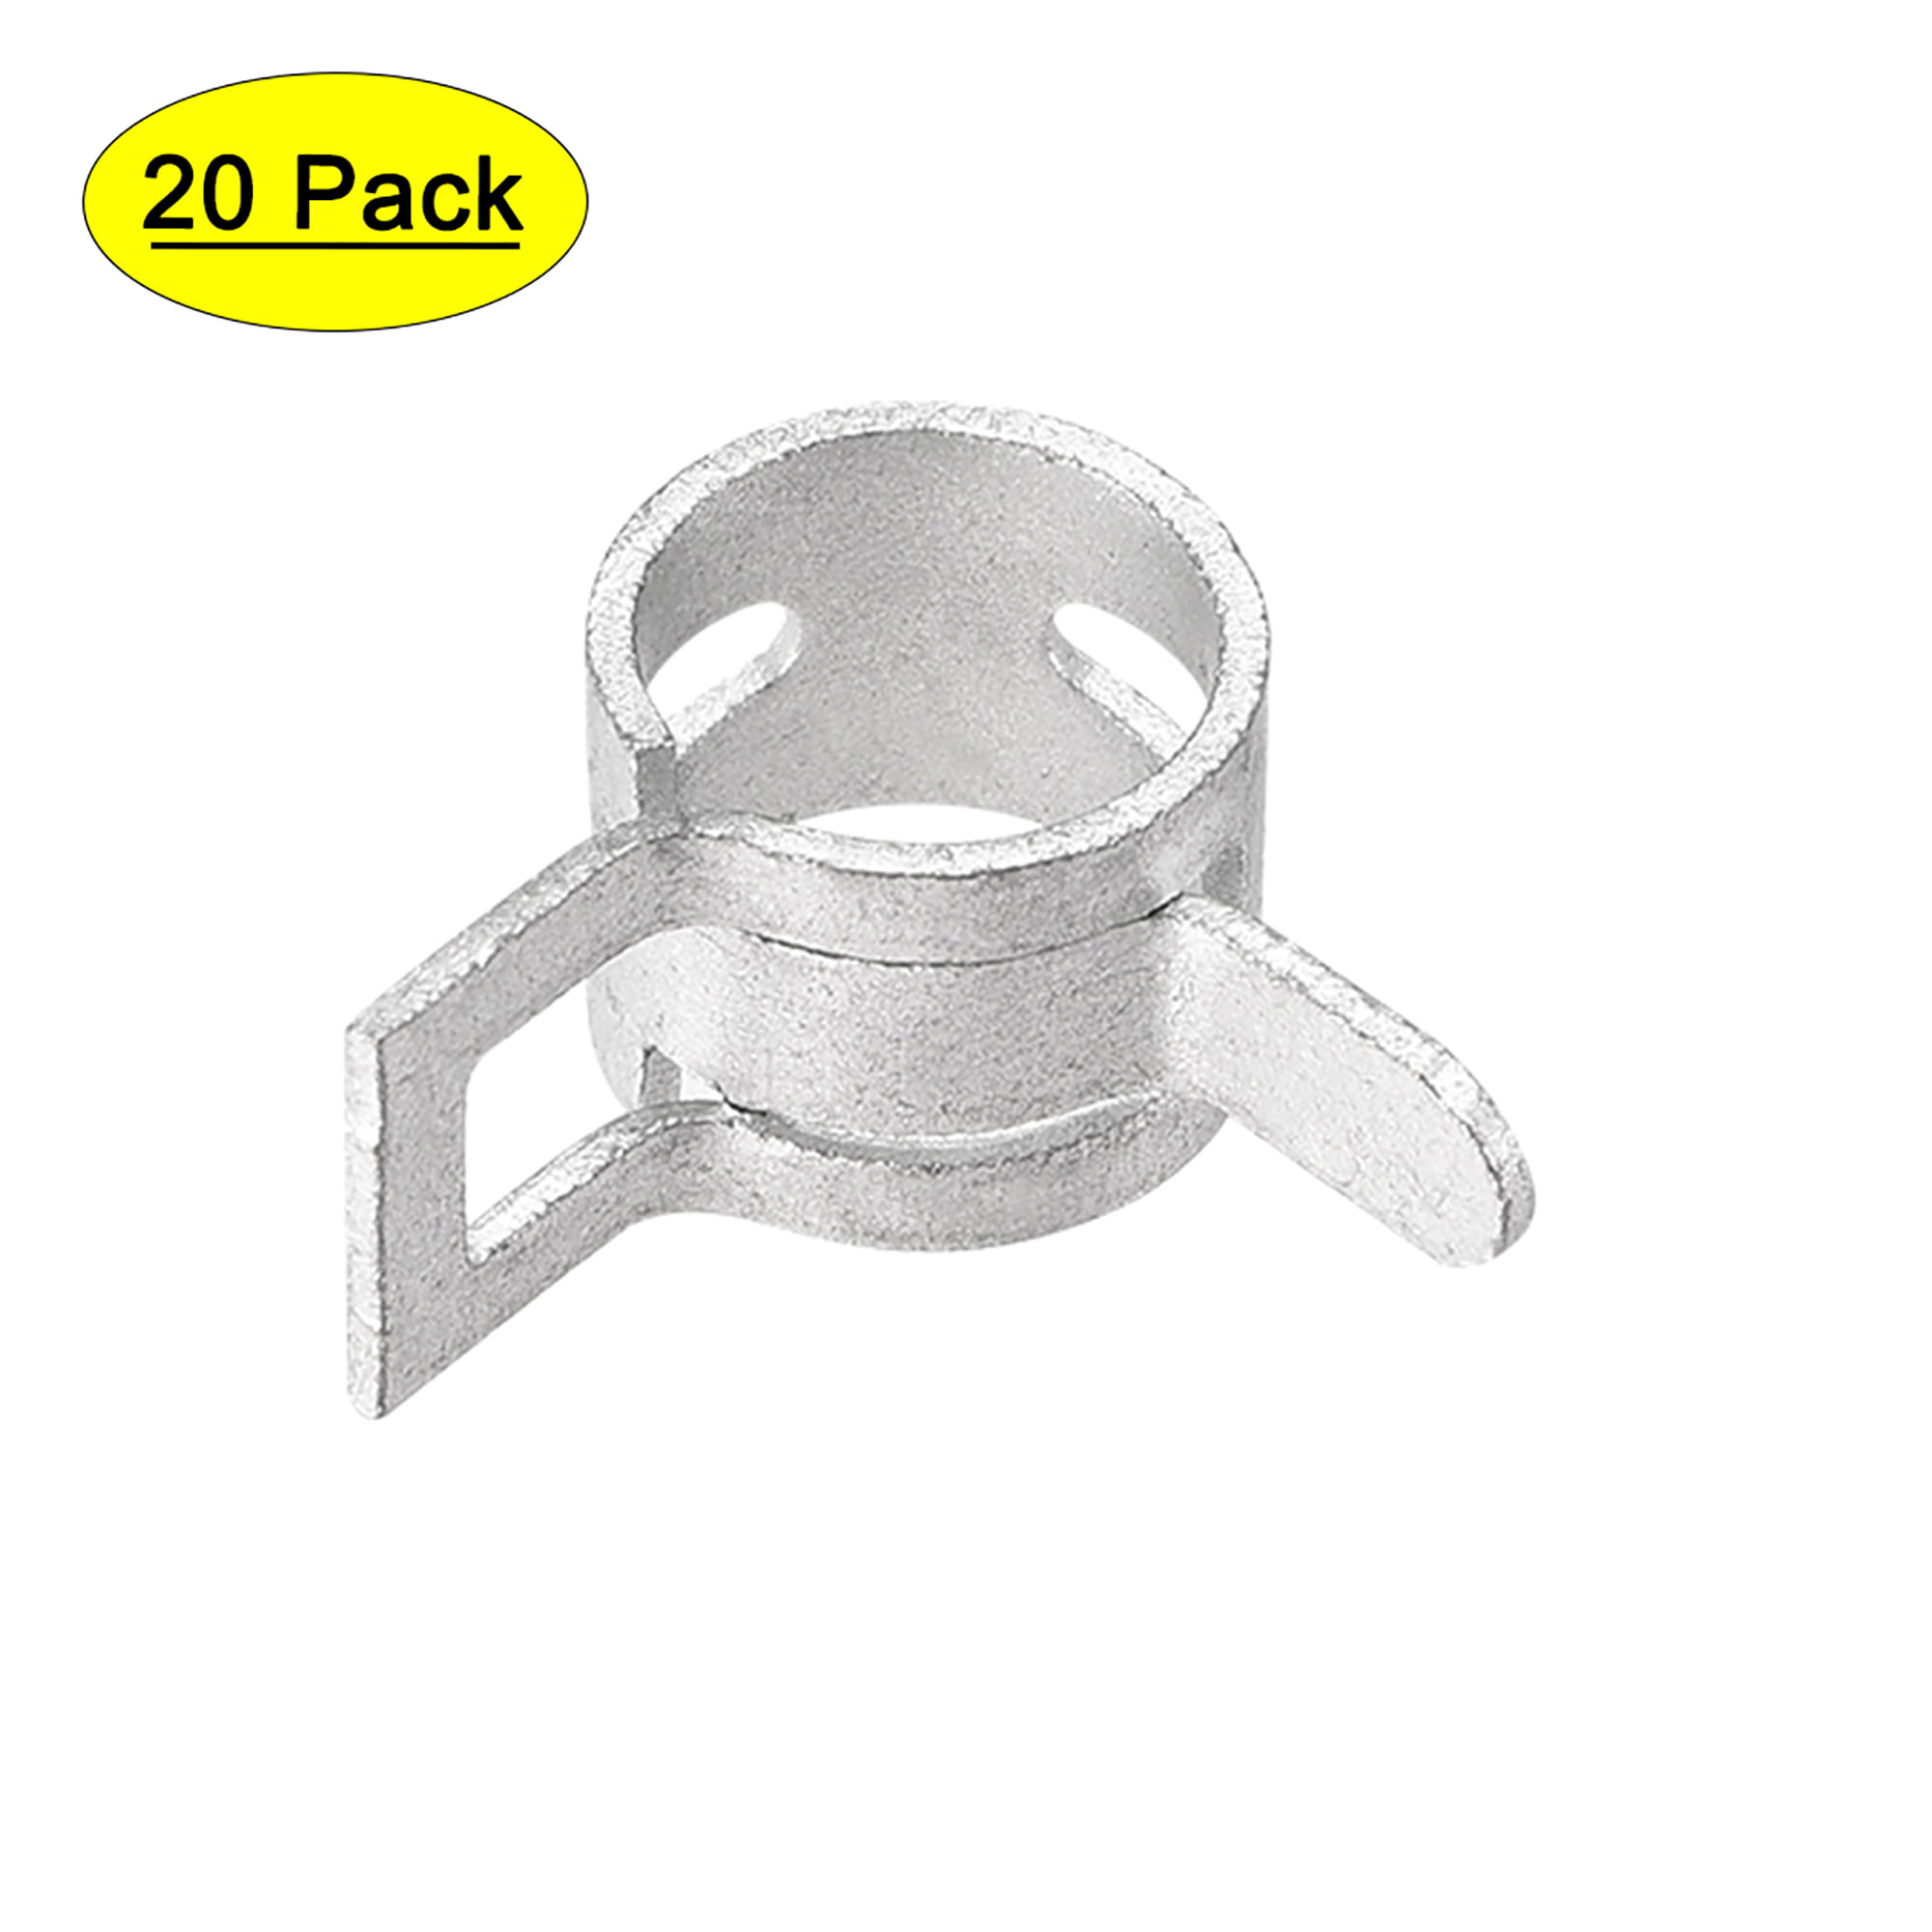 Steel Band Clamp 9mm Hose Tube Spring Clips Clamp Manganese Steel 20Pcs 